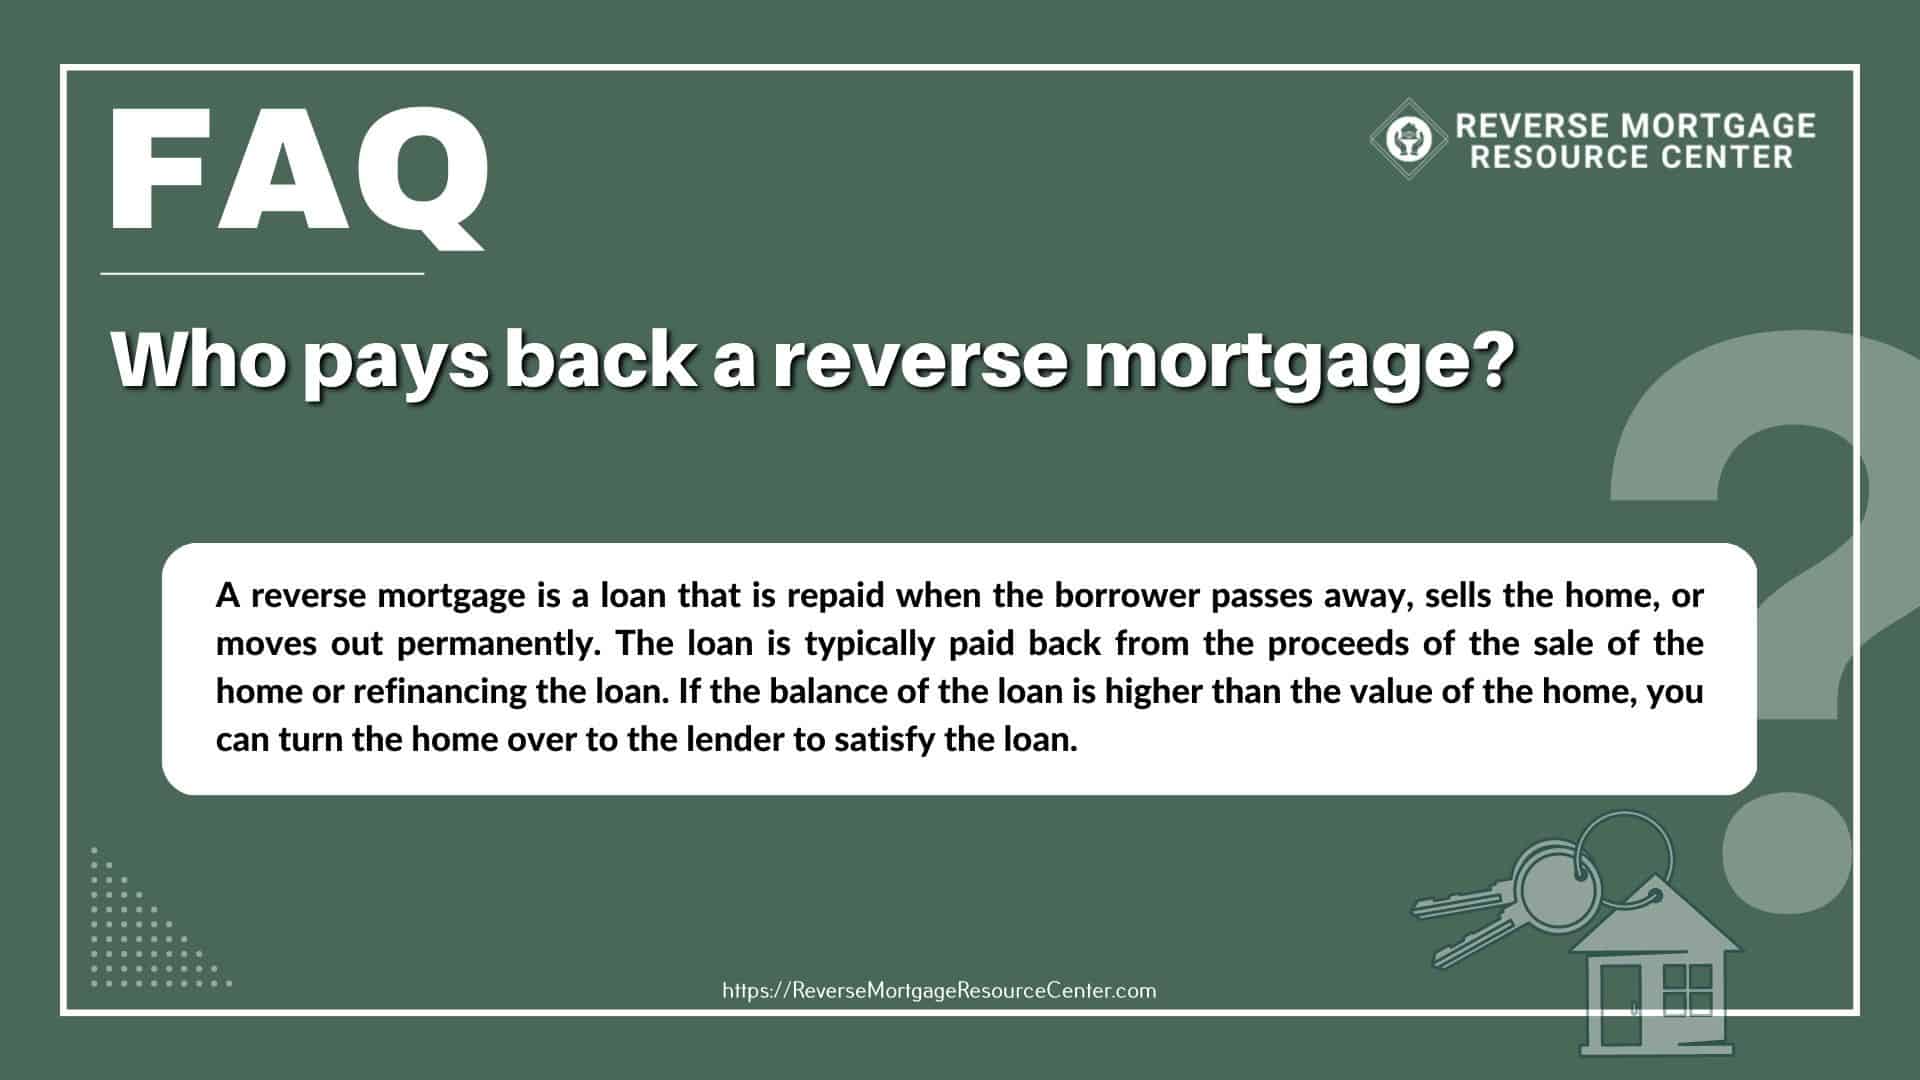 Who pays back a reverse mortgage?